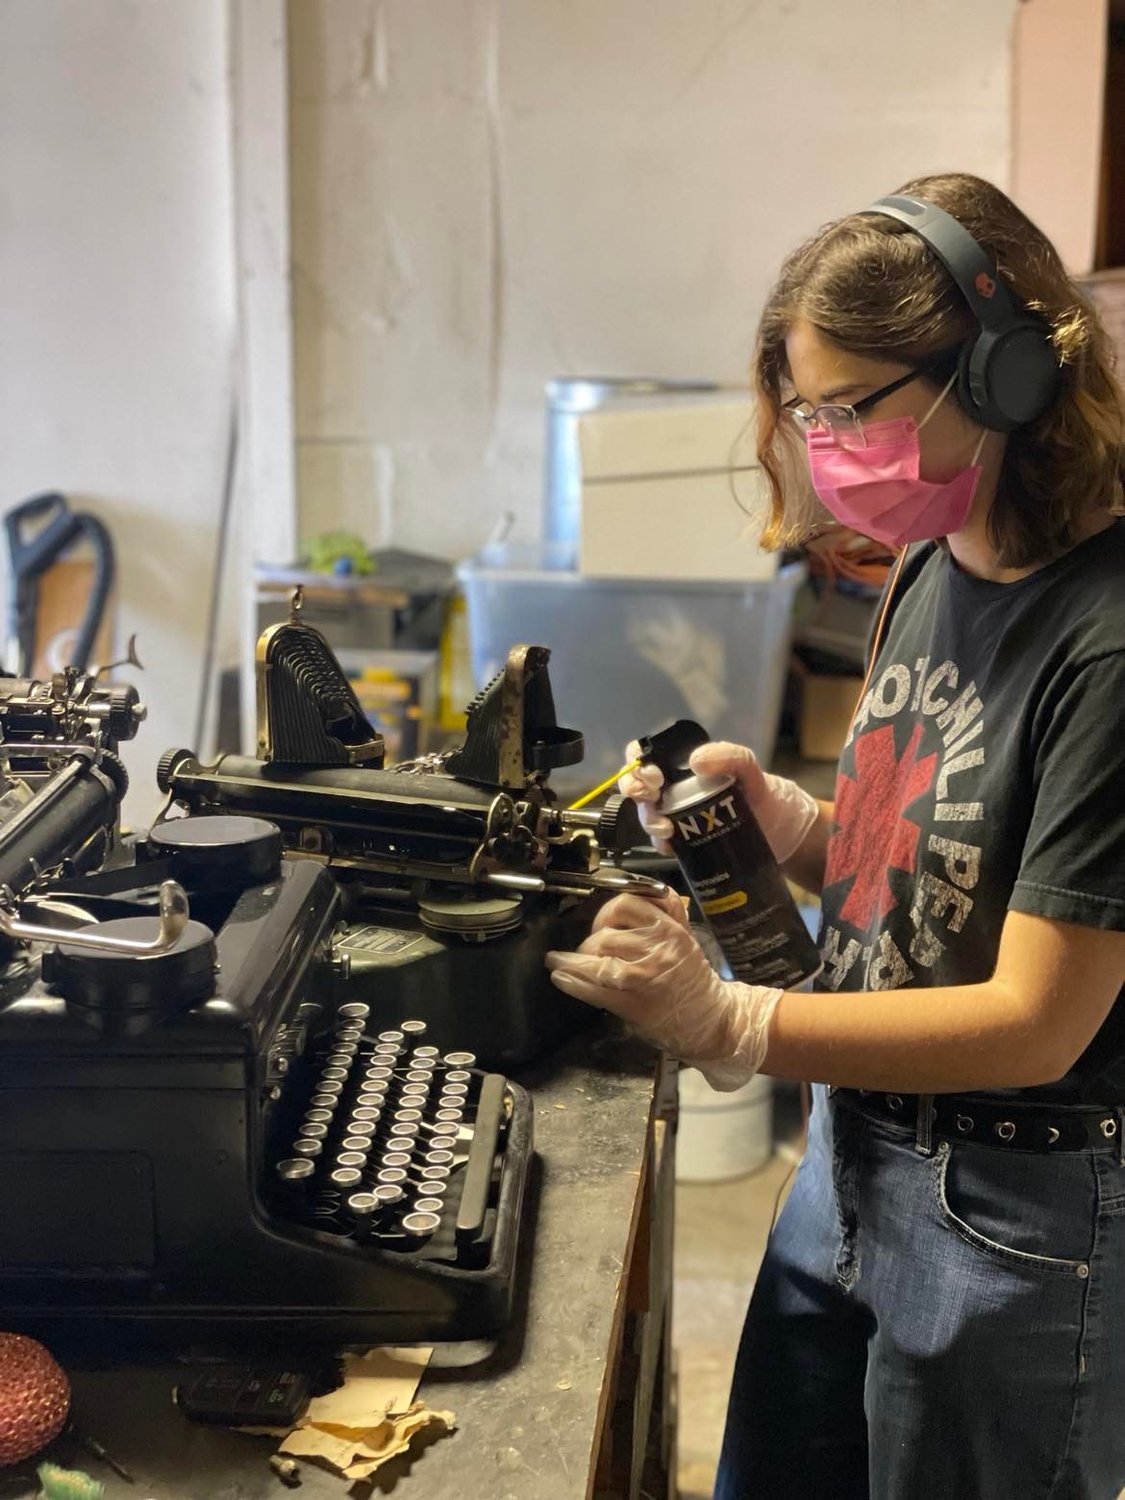 Jackie Ballard works on cleaning and repairing a typewriter at the Clare County Cleaver during her internership with the Cleaver as part of the Michigan Works! Region 7B Young Professionals Program.